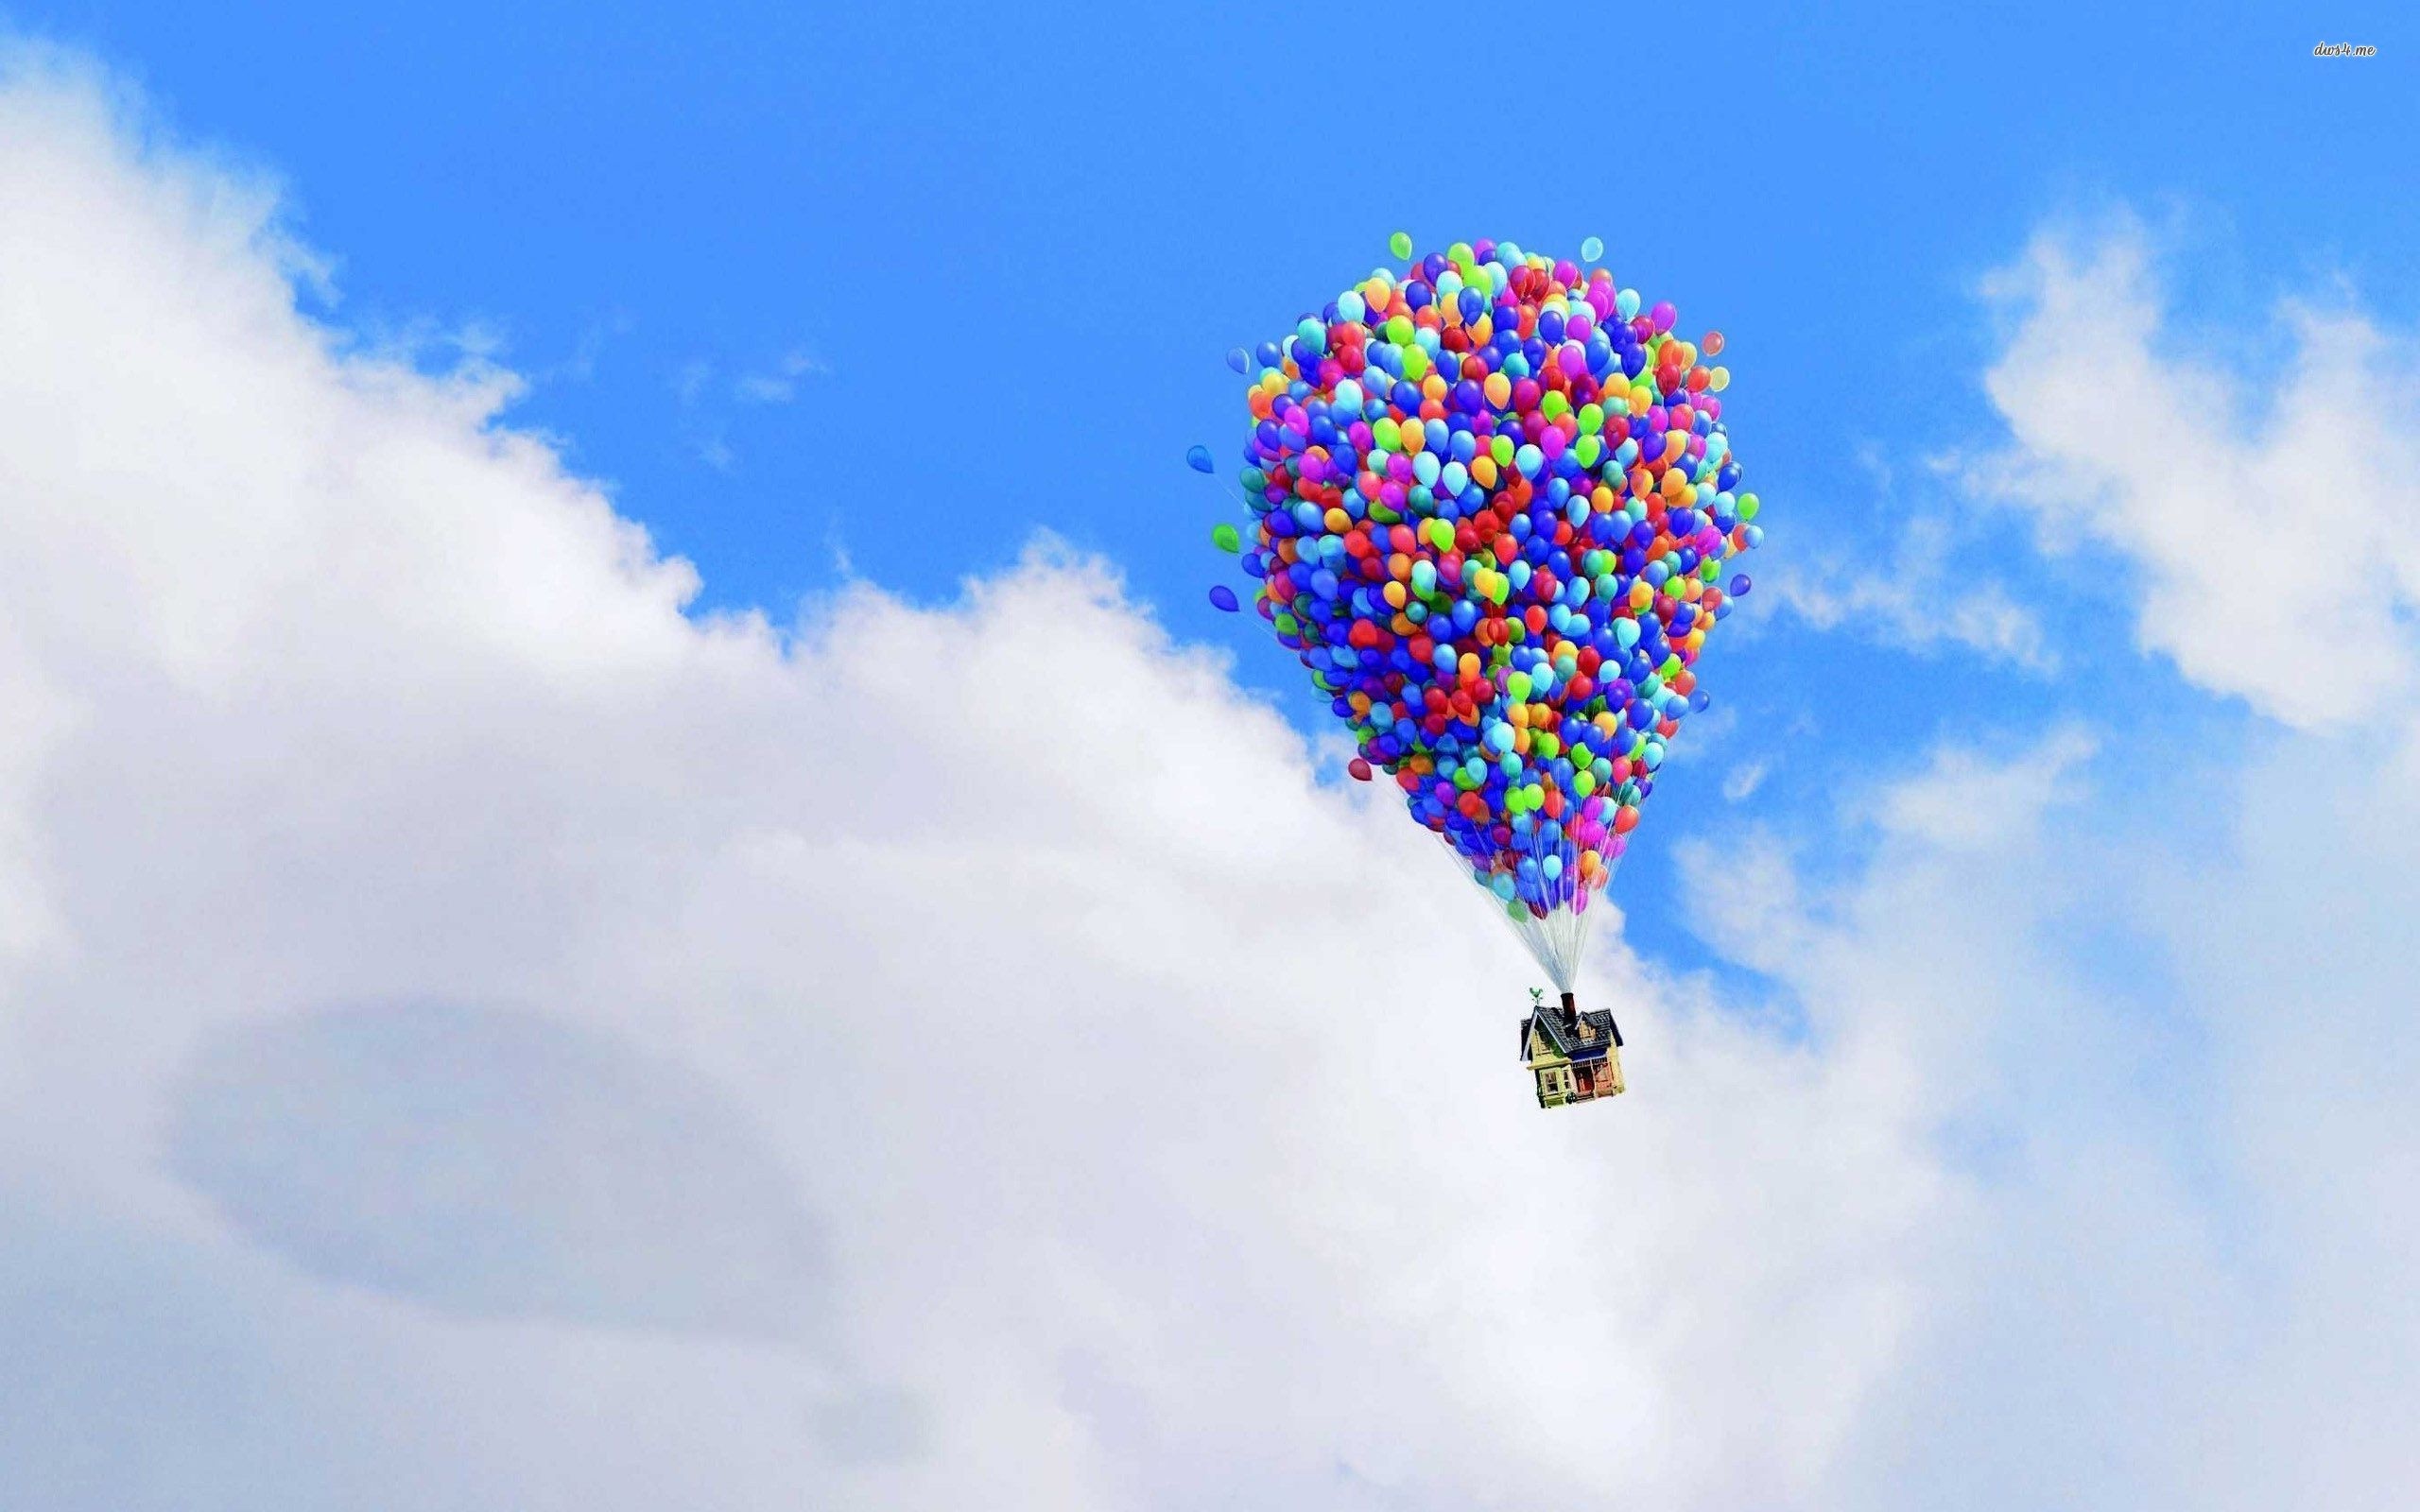 Cluster Ballooning: Carl Fredricksen flying house, Up animation movie created by Pixar. 2560x1600 HD Background.